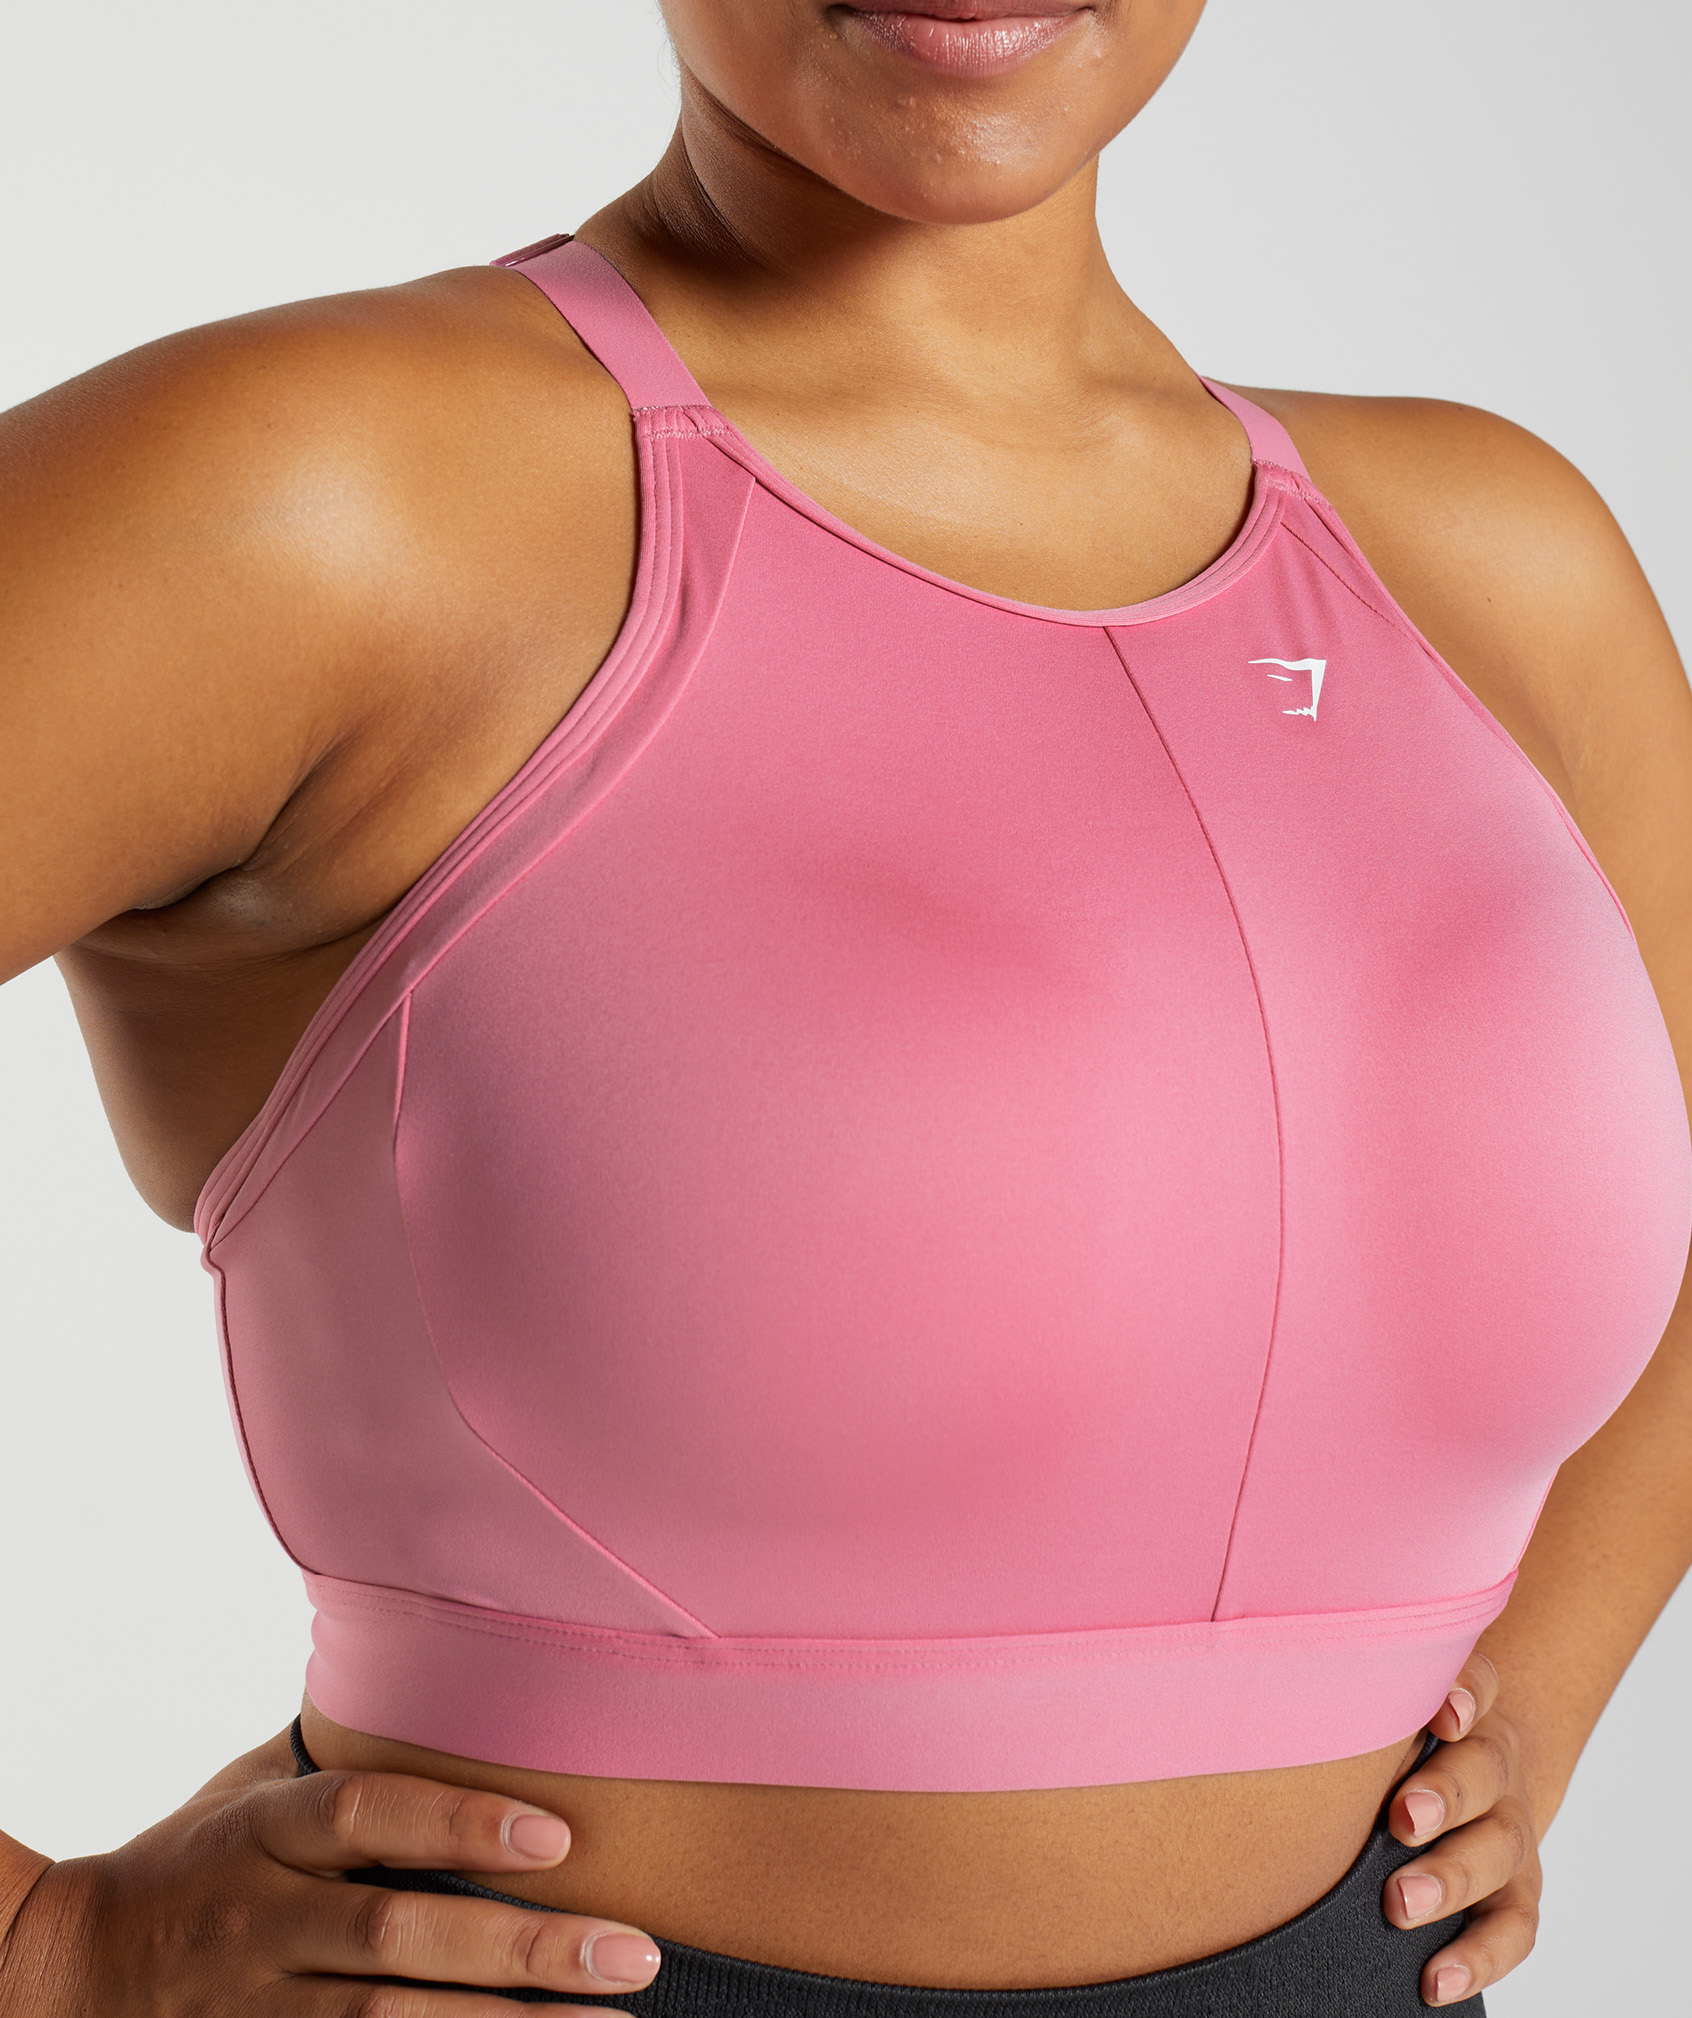 How a Supportive Sports Bra Should Fit & Feel - Best Sports Bra